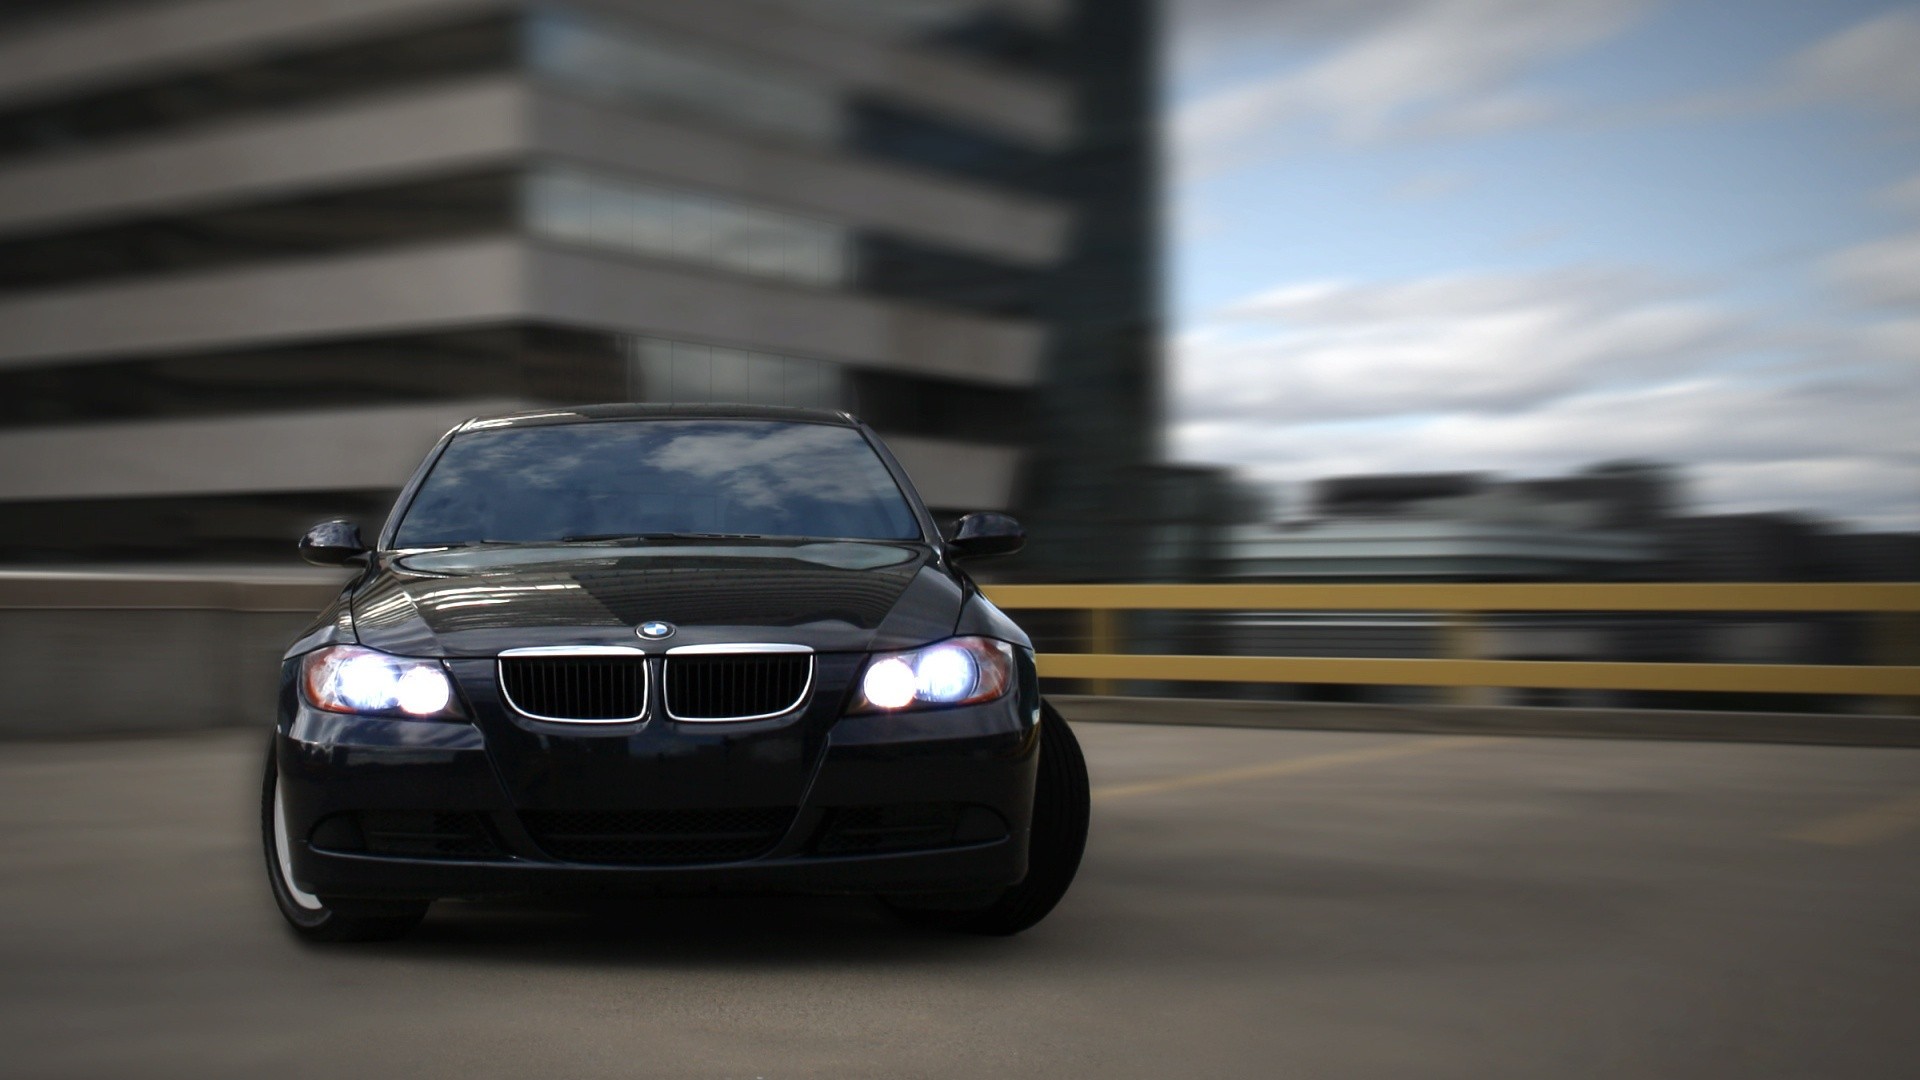 BMW, Drift, Car Wallpapers HD / Desktop and Mobile Backgrounds